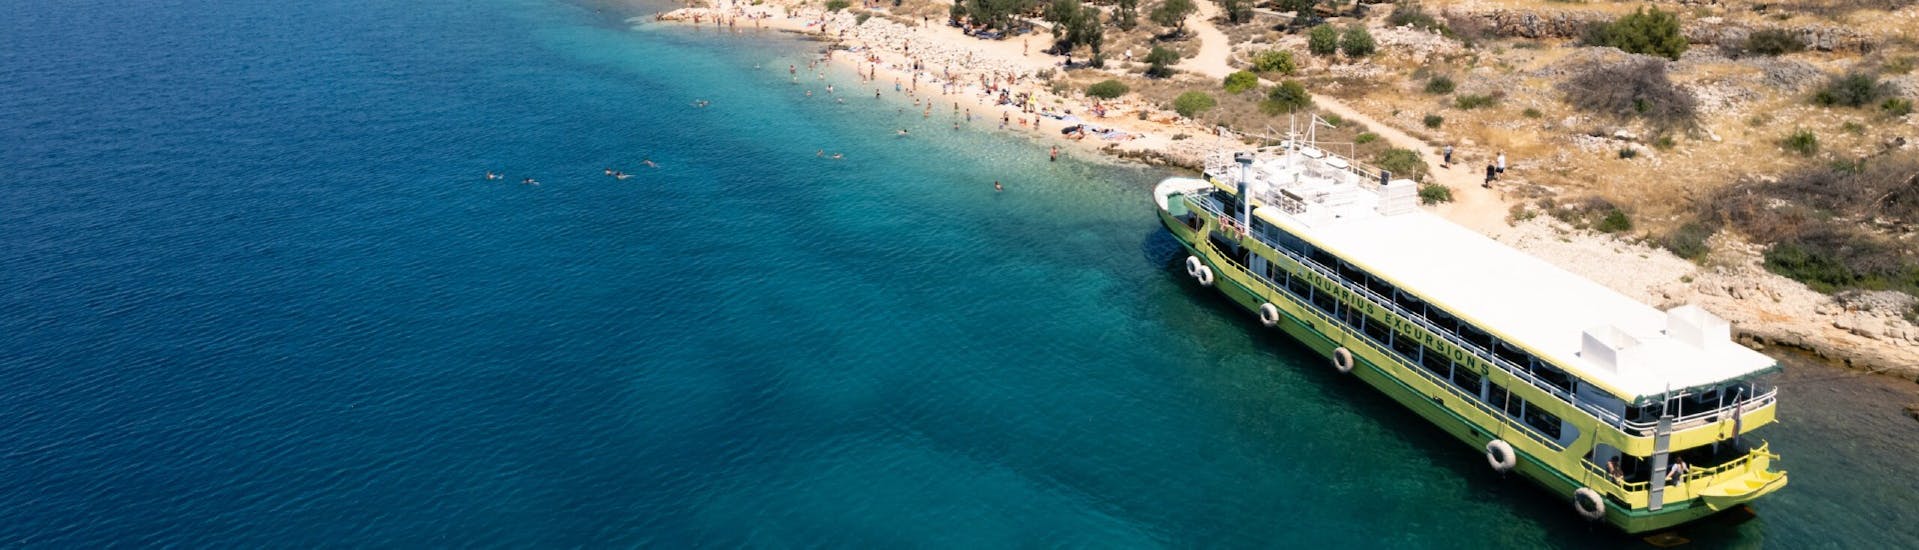 The boat from Aquarius Excursions Zadar in front of a beach during their trip.